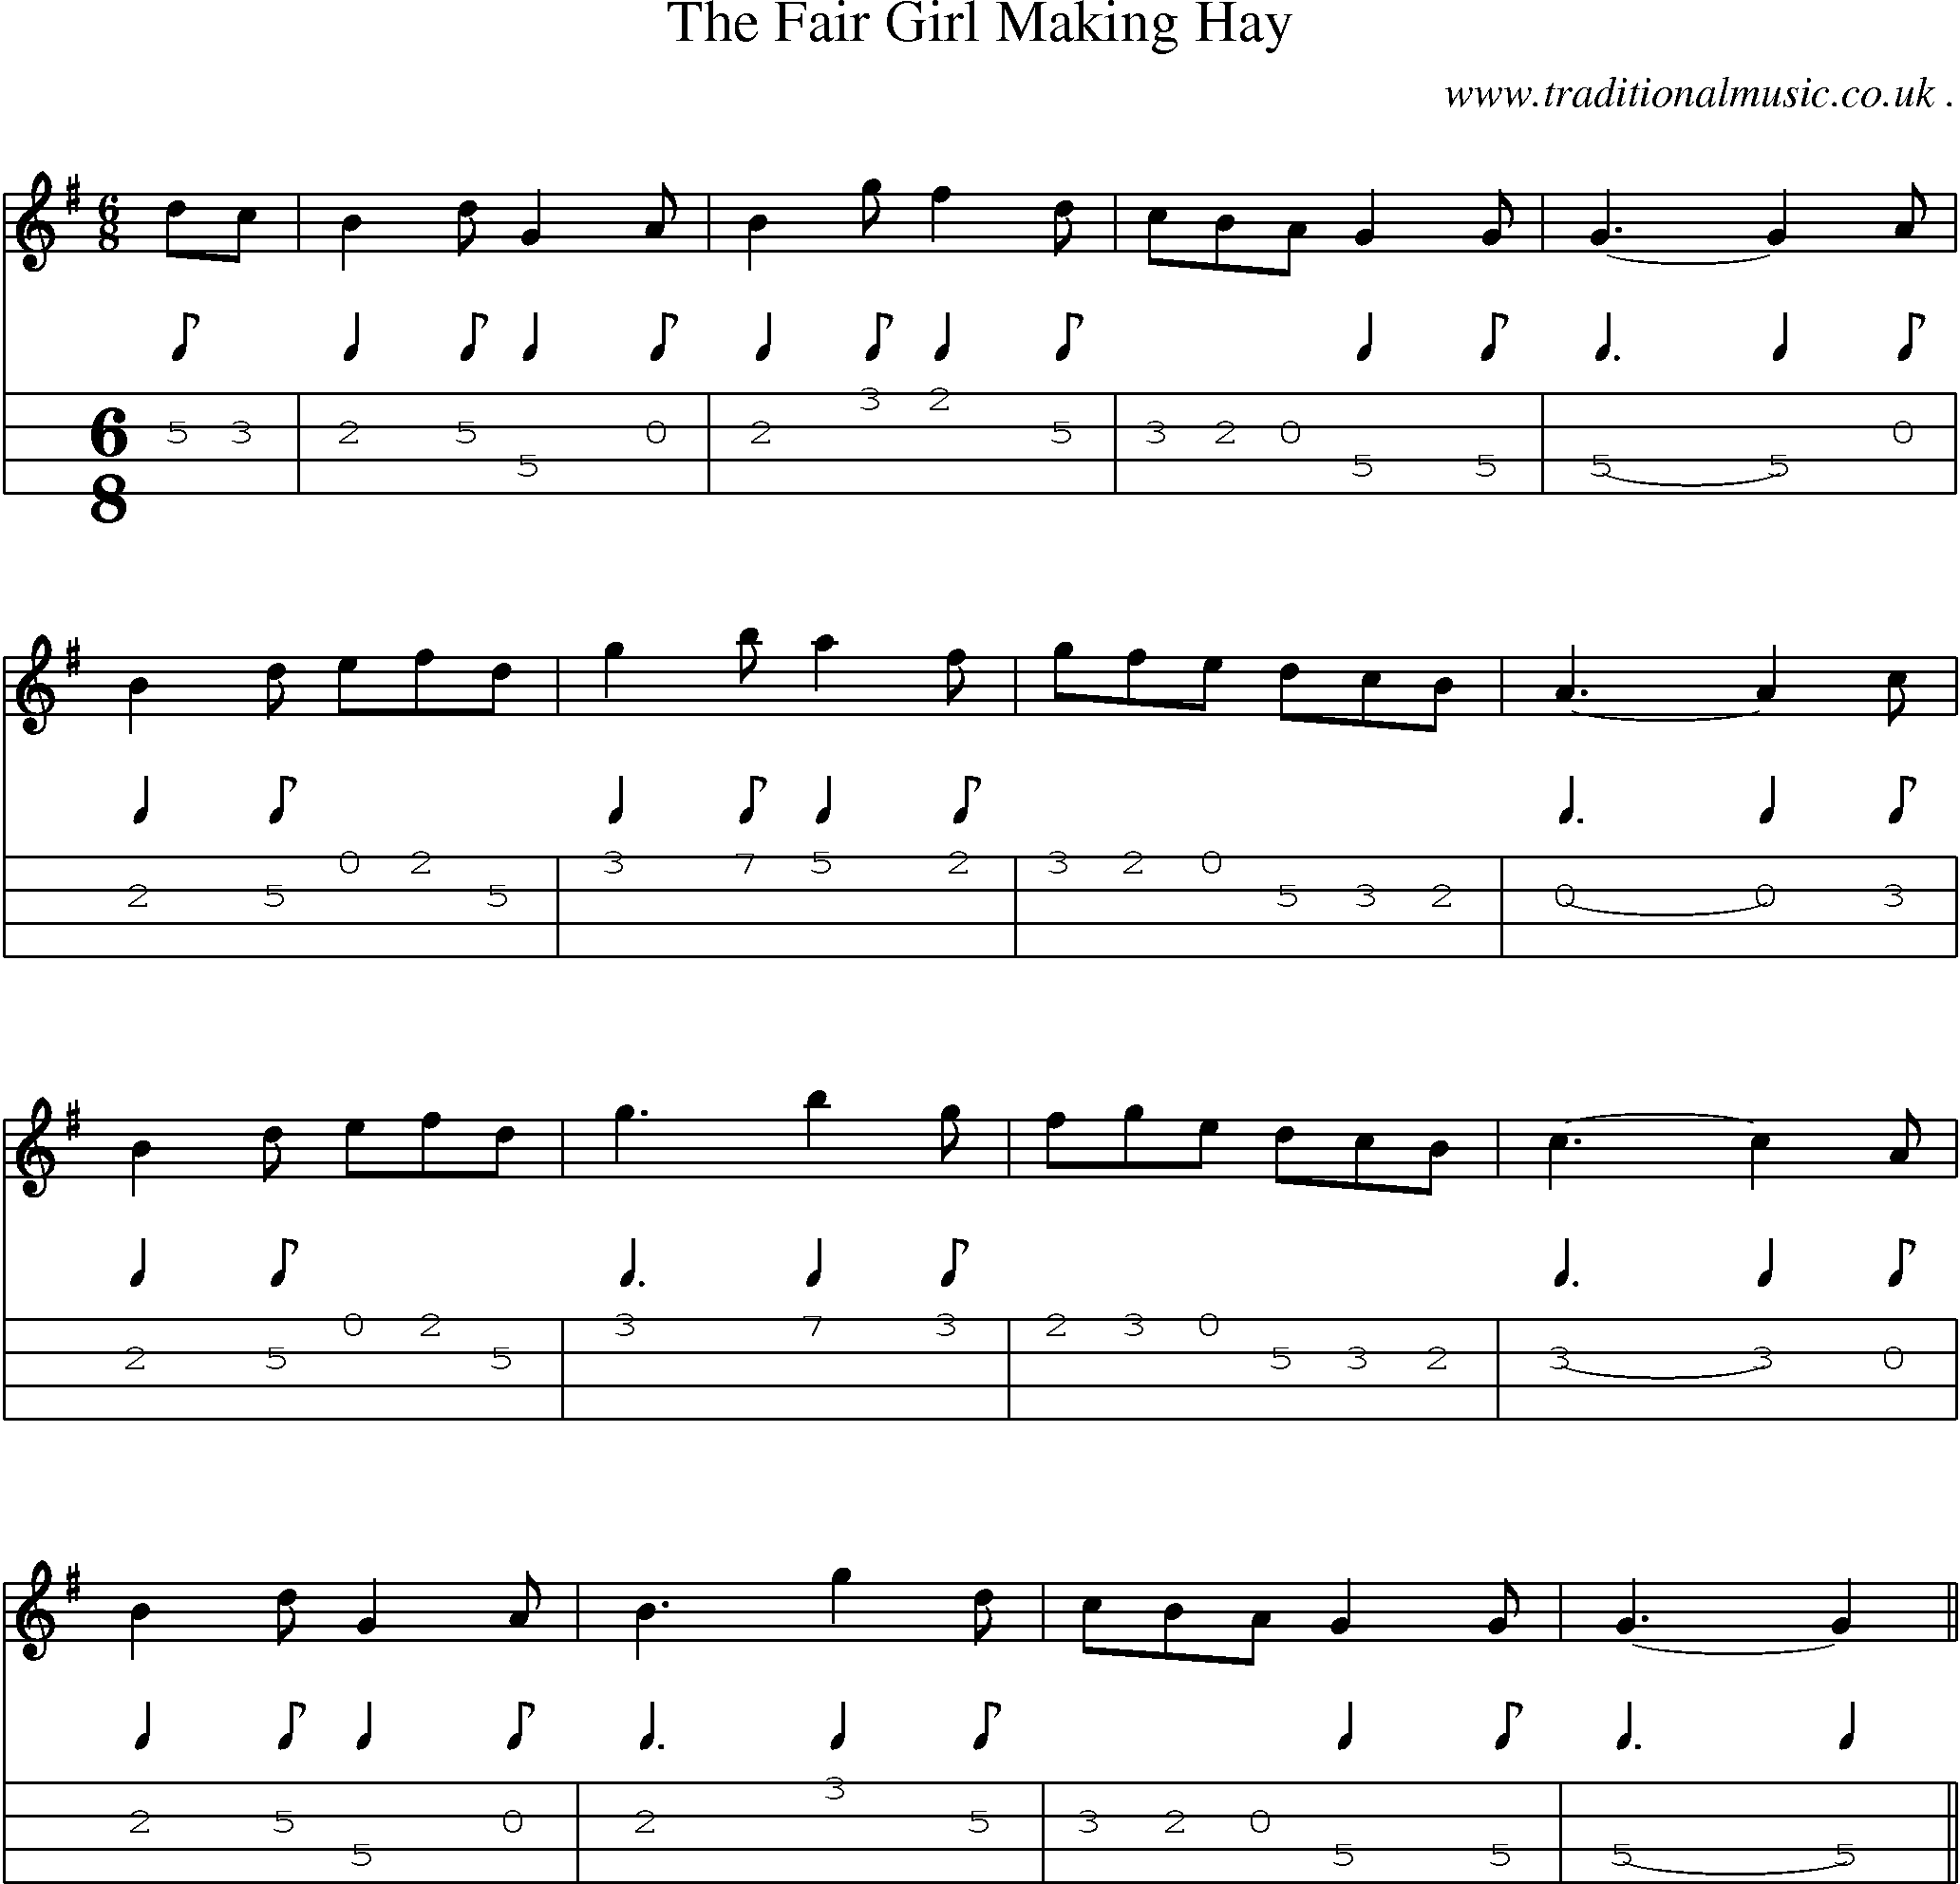 Sheet-Music and Mandolin Tabs for The Fair Girl Making Hay